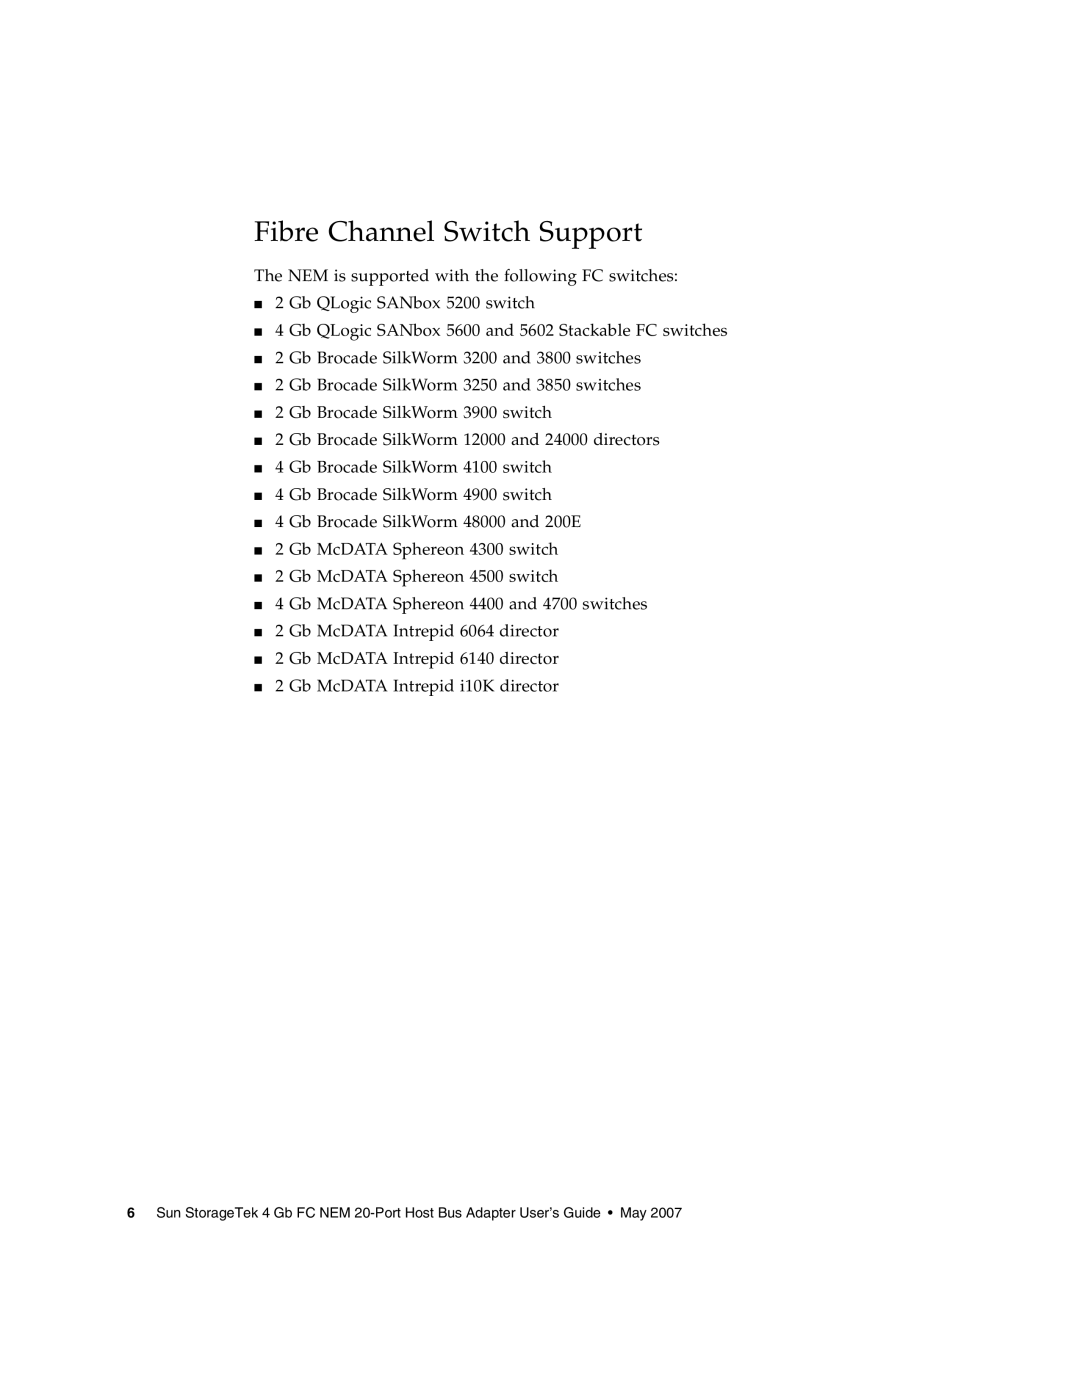 Sun Microsystems 2.0 manual Fibre Channel Switch Support 